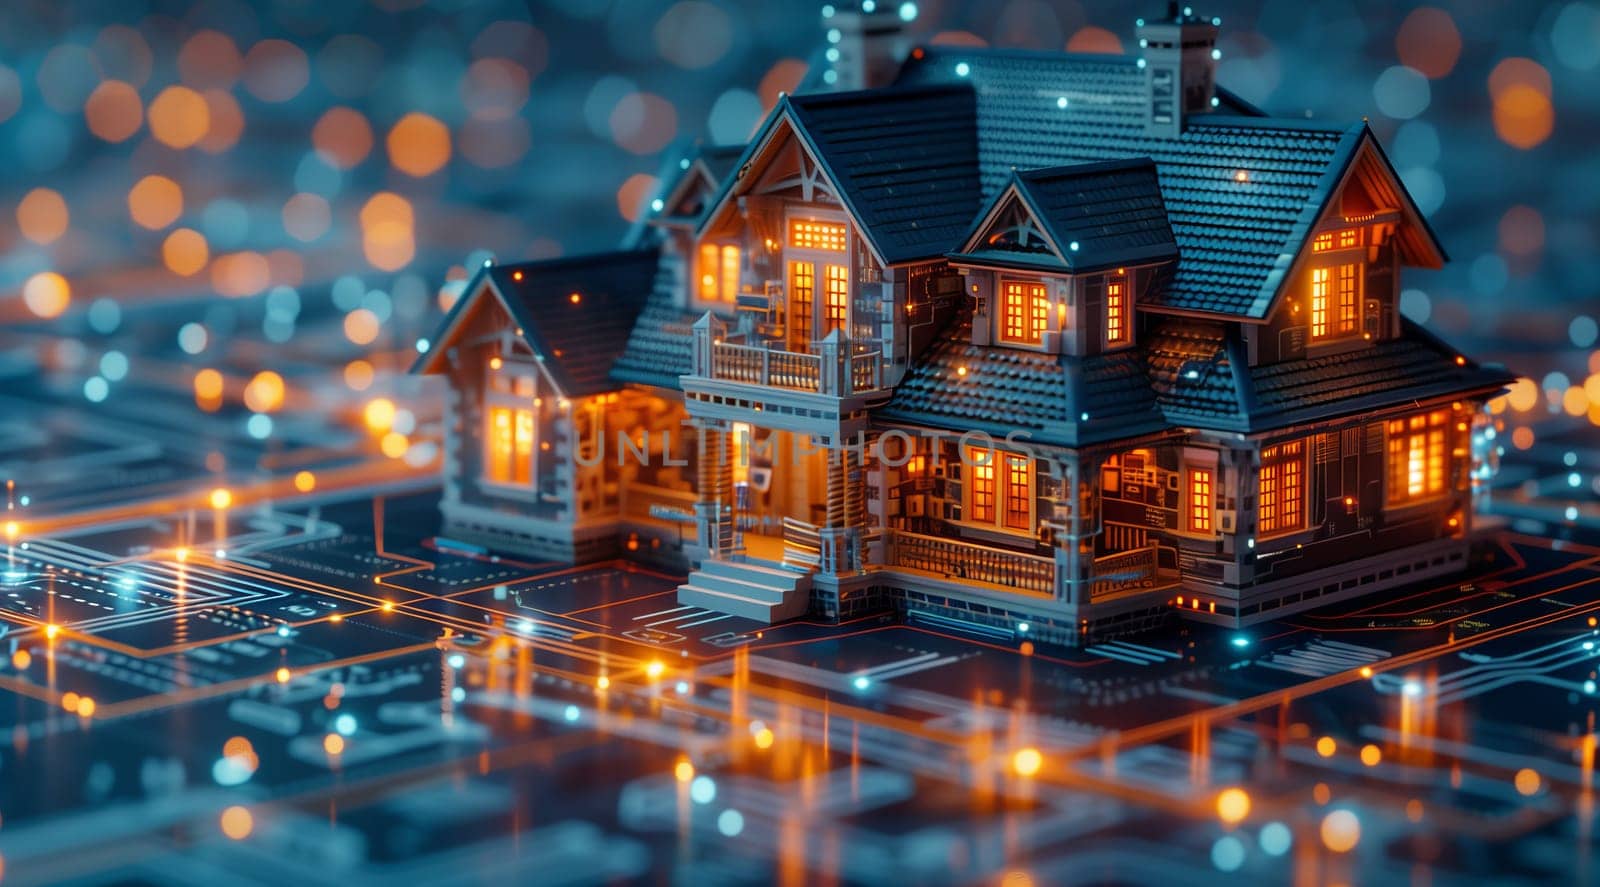 A model of a house with electric blue lights on its facade is placed on a table, creating a miniature cityscape in a winter landscape